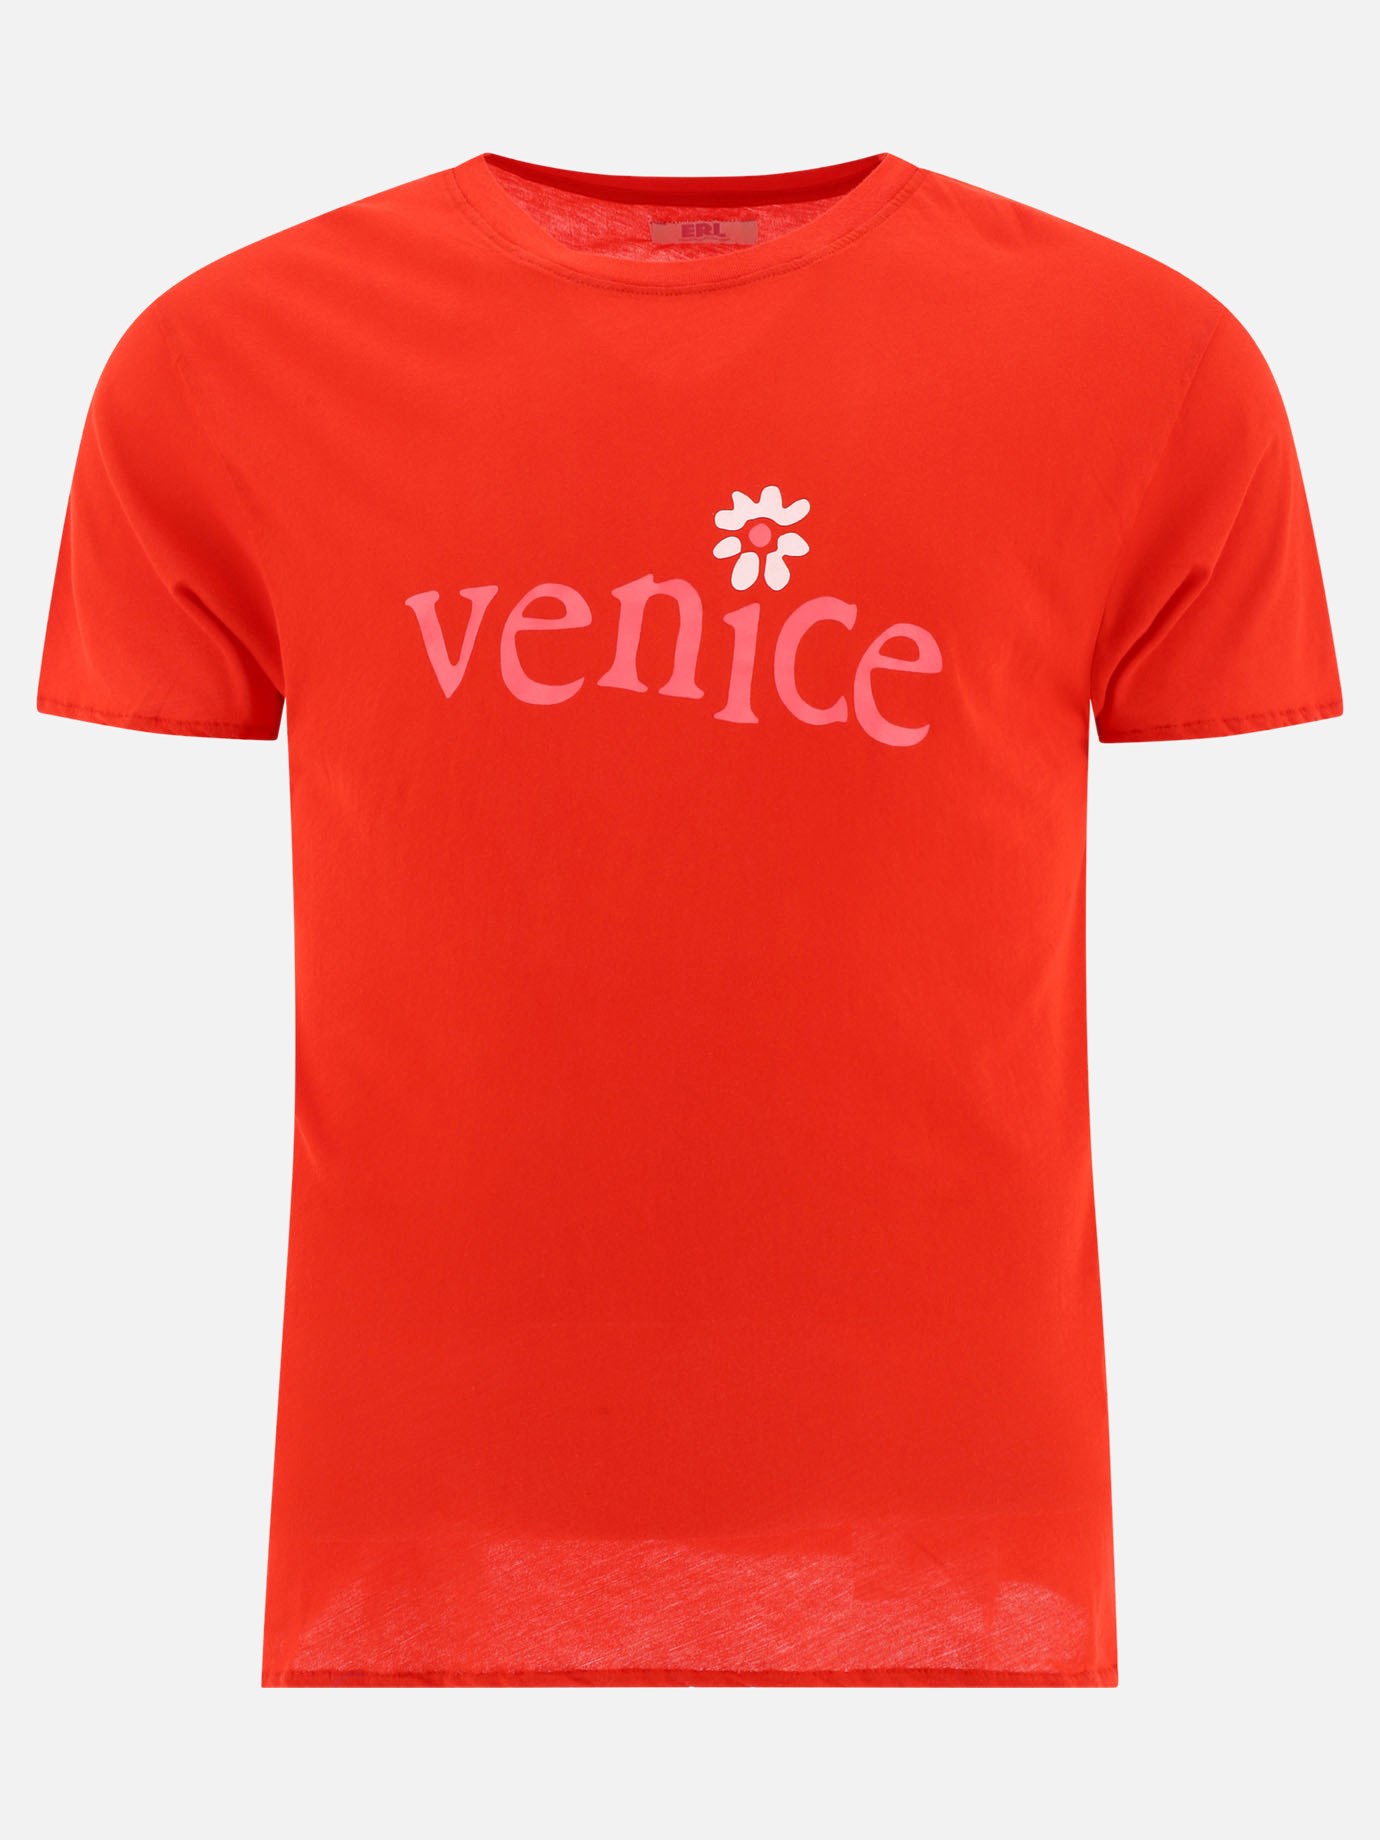 T-shirt  Venice  by ERL